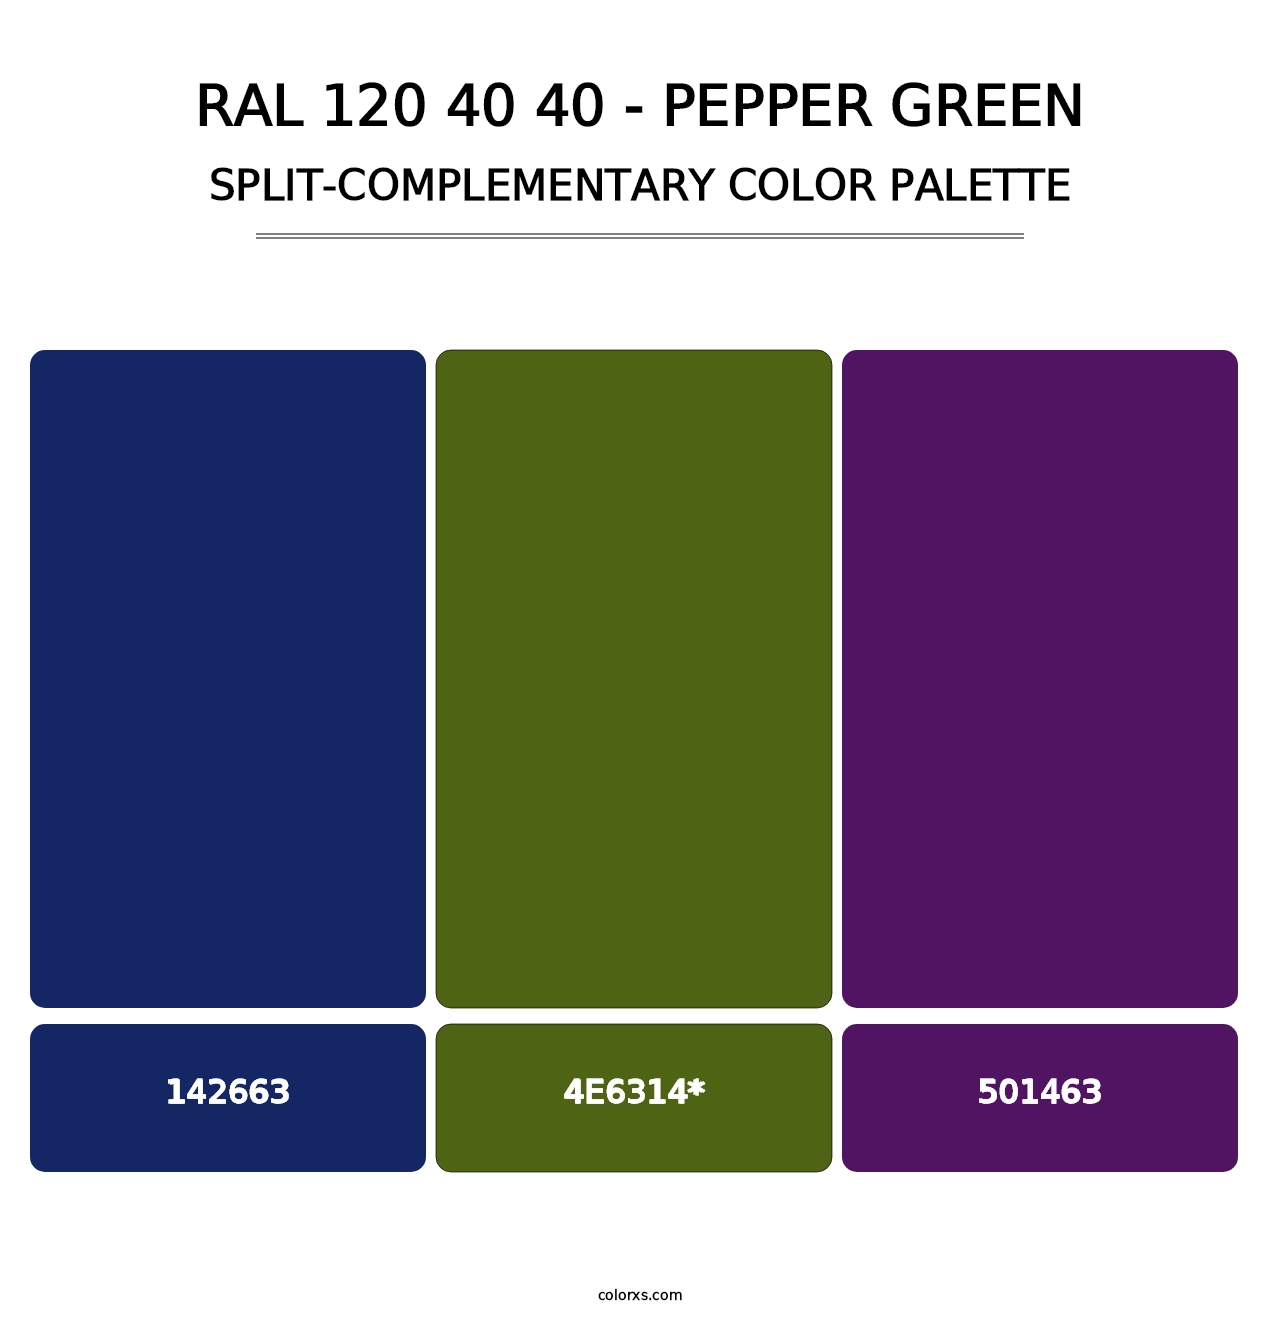 RAL 120 40 40 - Pepper Green - Split-Complementary Color Palette